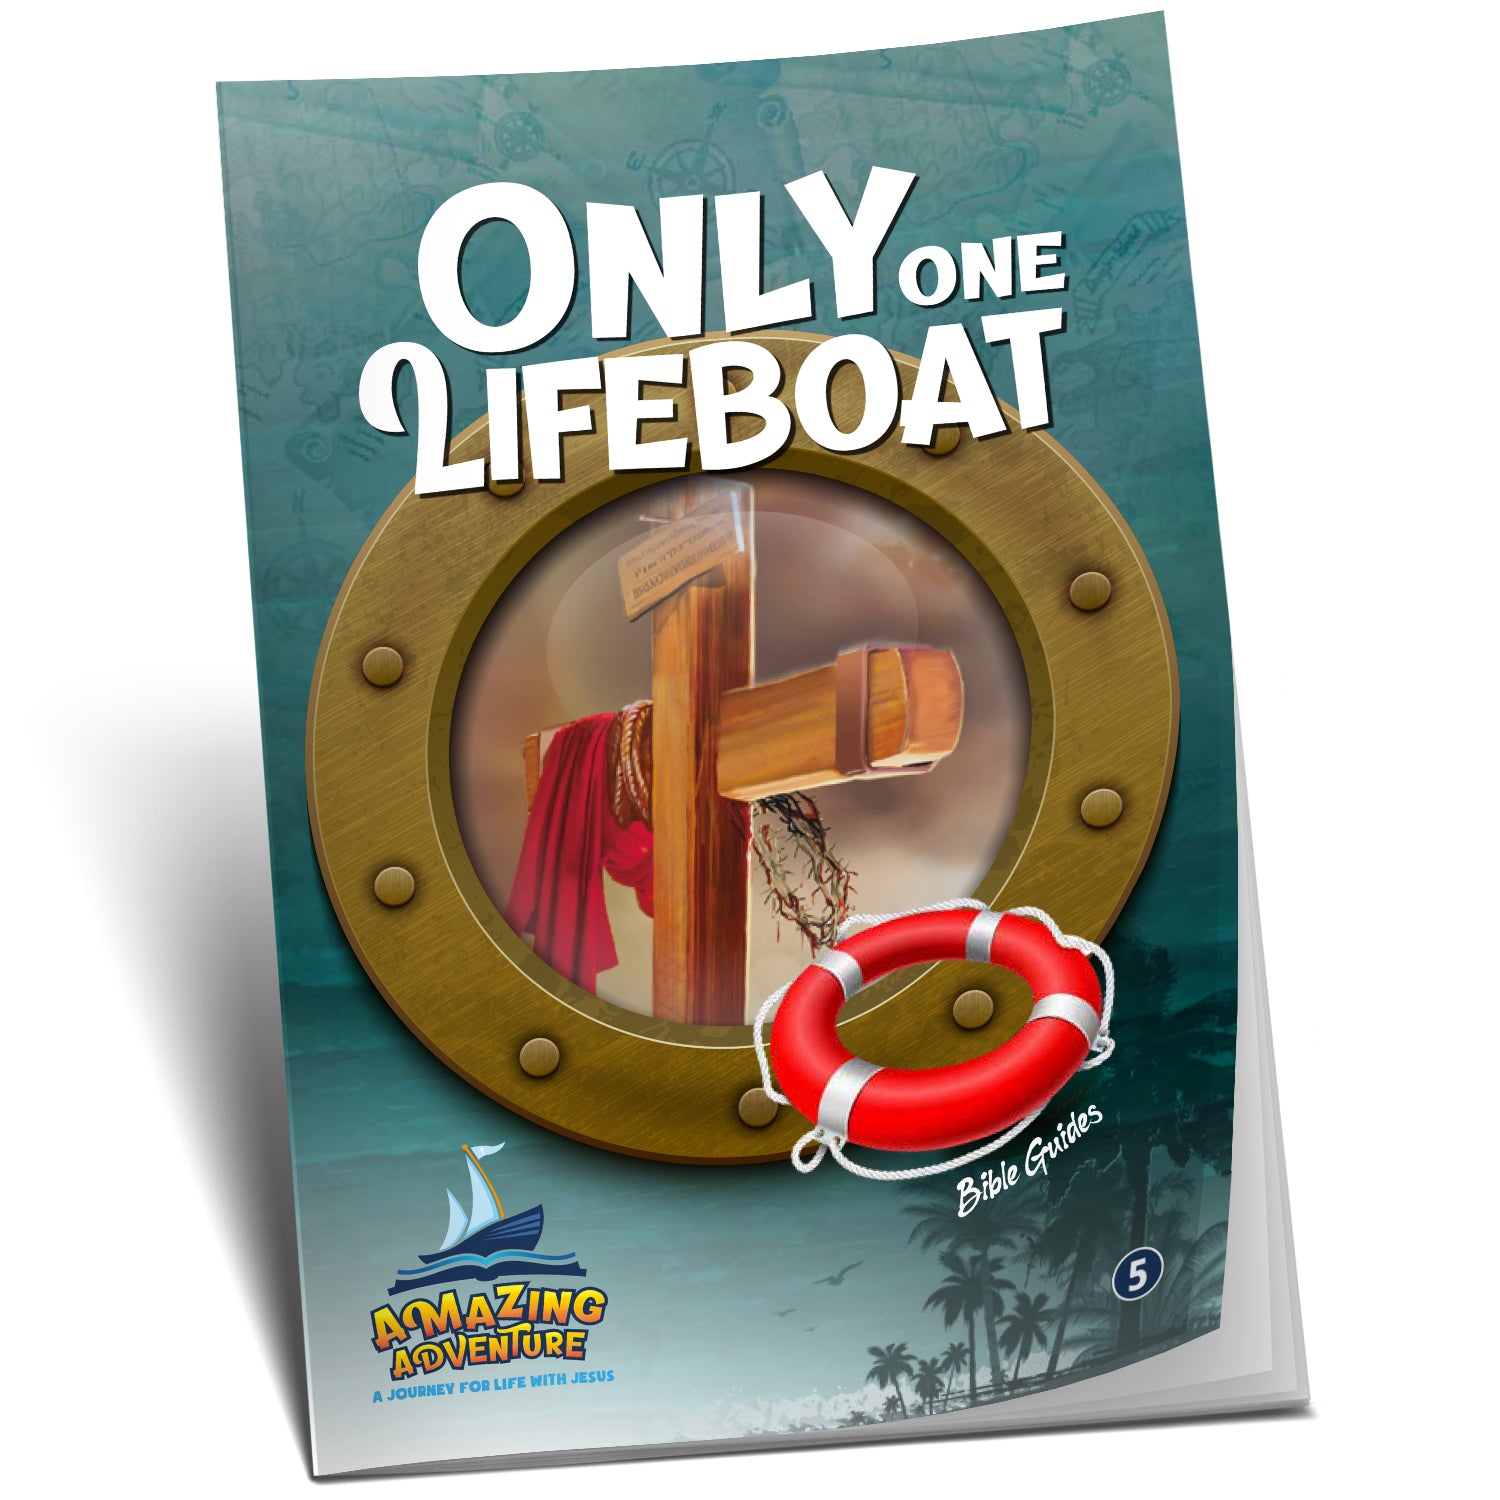 Amazing Adventure - The Only Lifeboat by Doug Batchelor